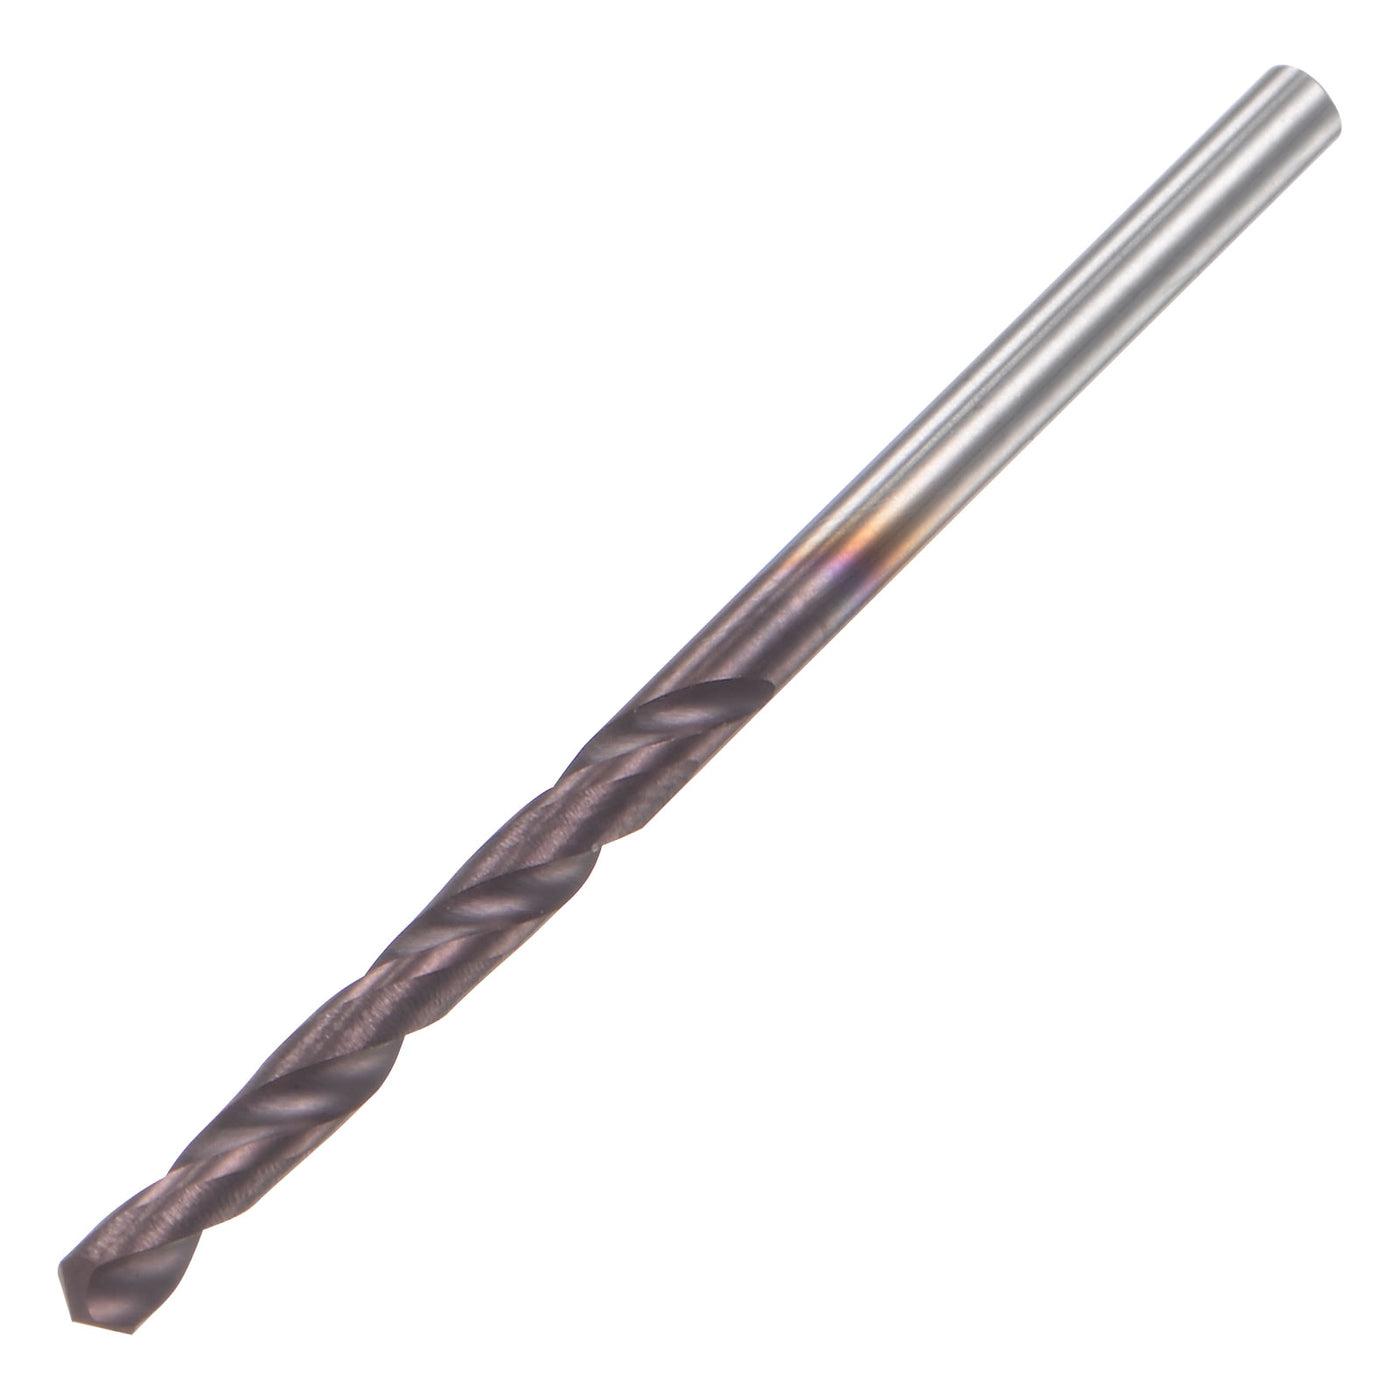 uxcell Uxcell 2mm DIN K45 Tungsten Carbide AlTiSin Coated Drill Bit for Stainless Steel